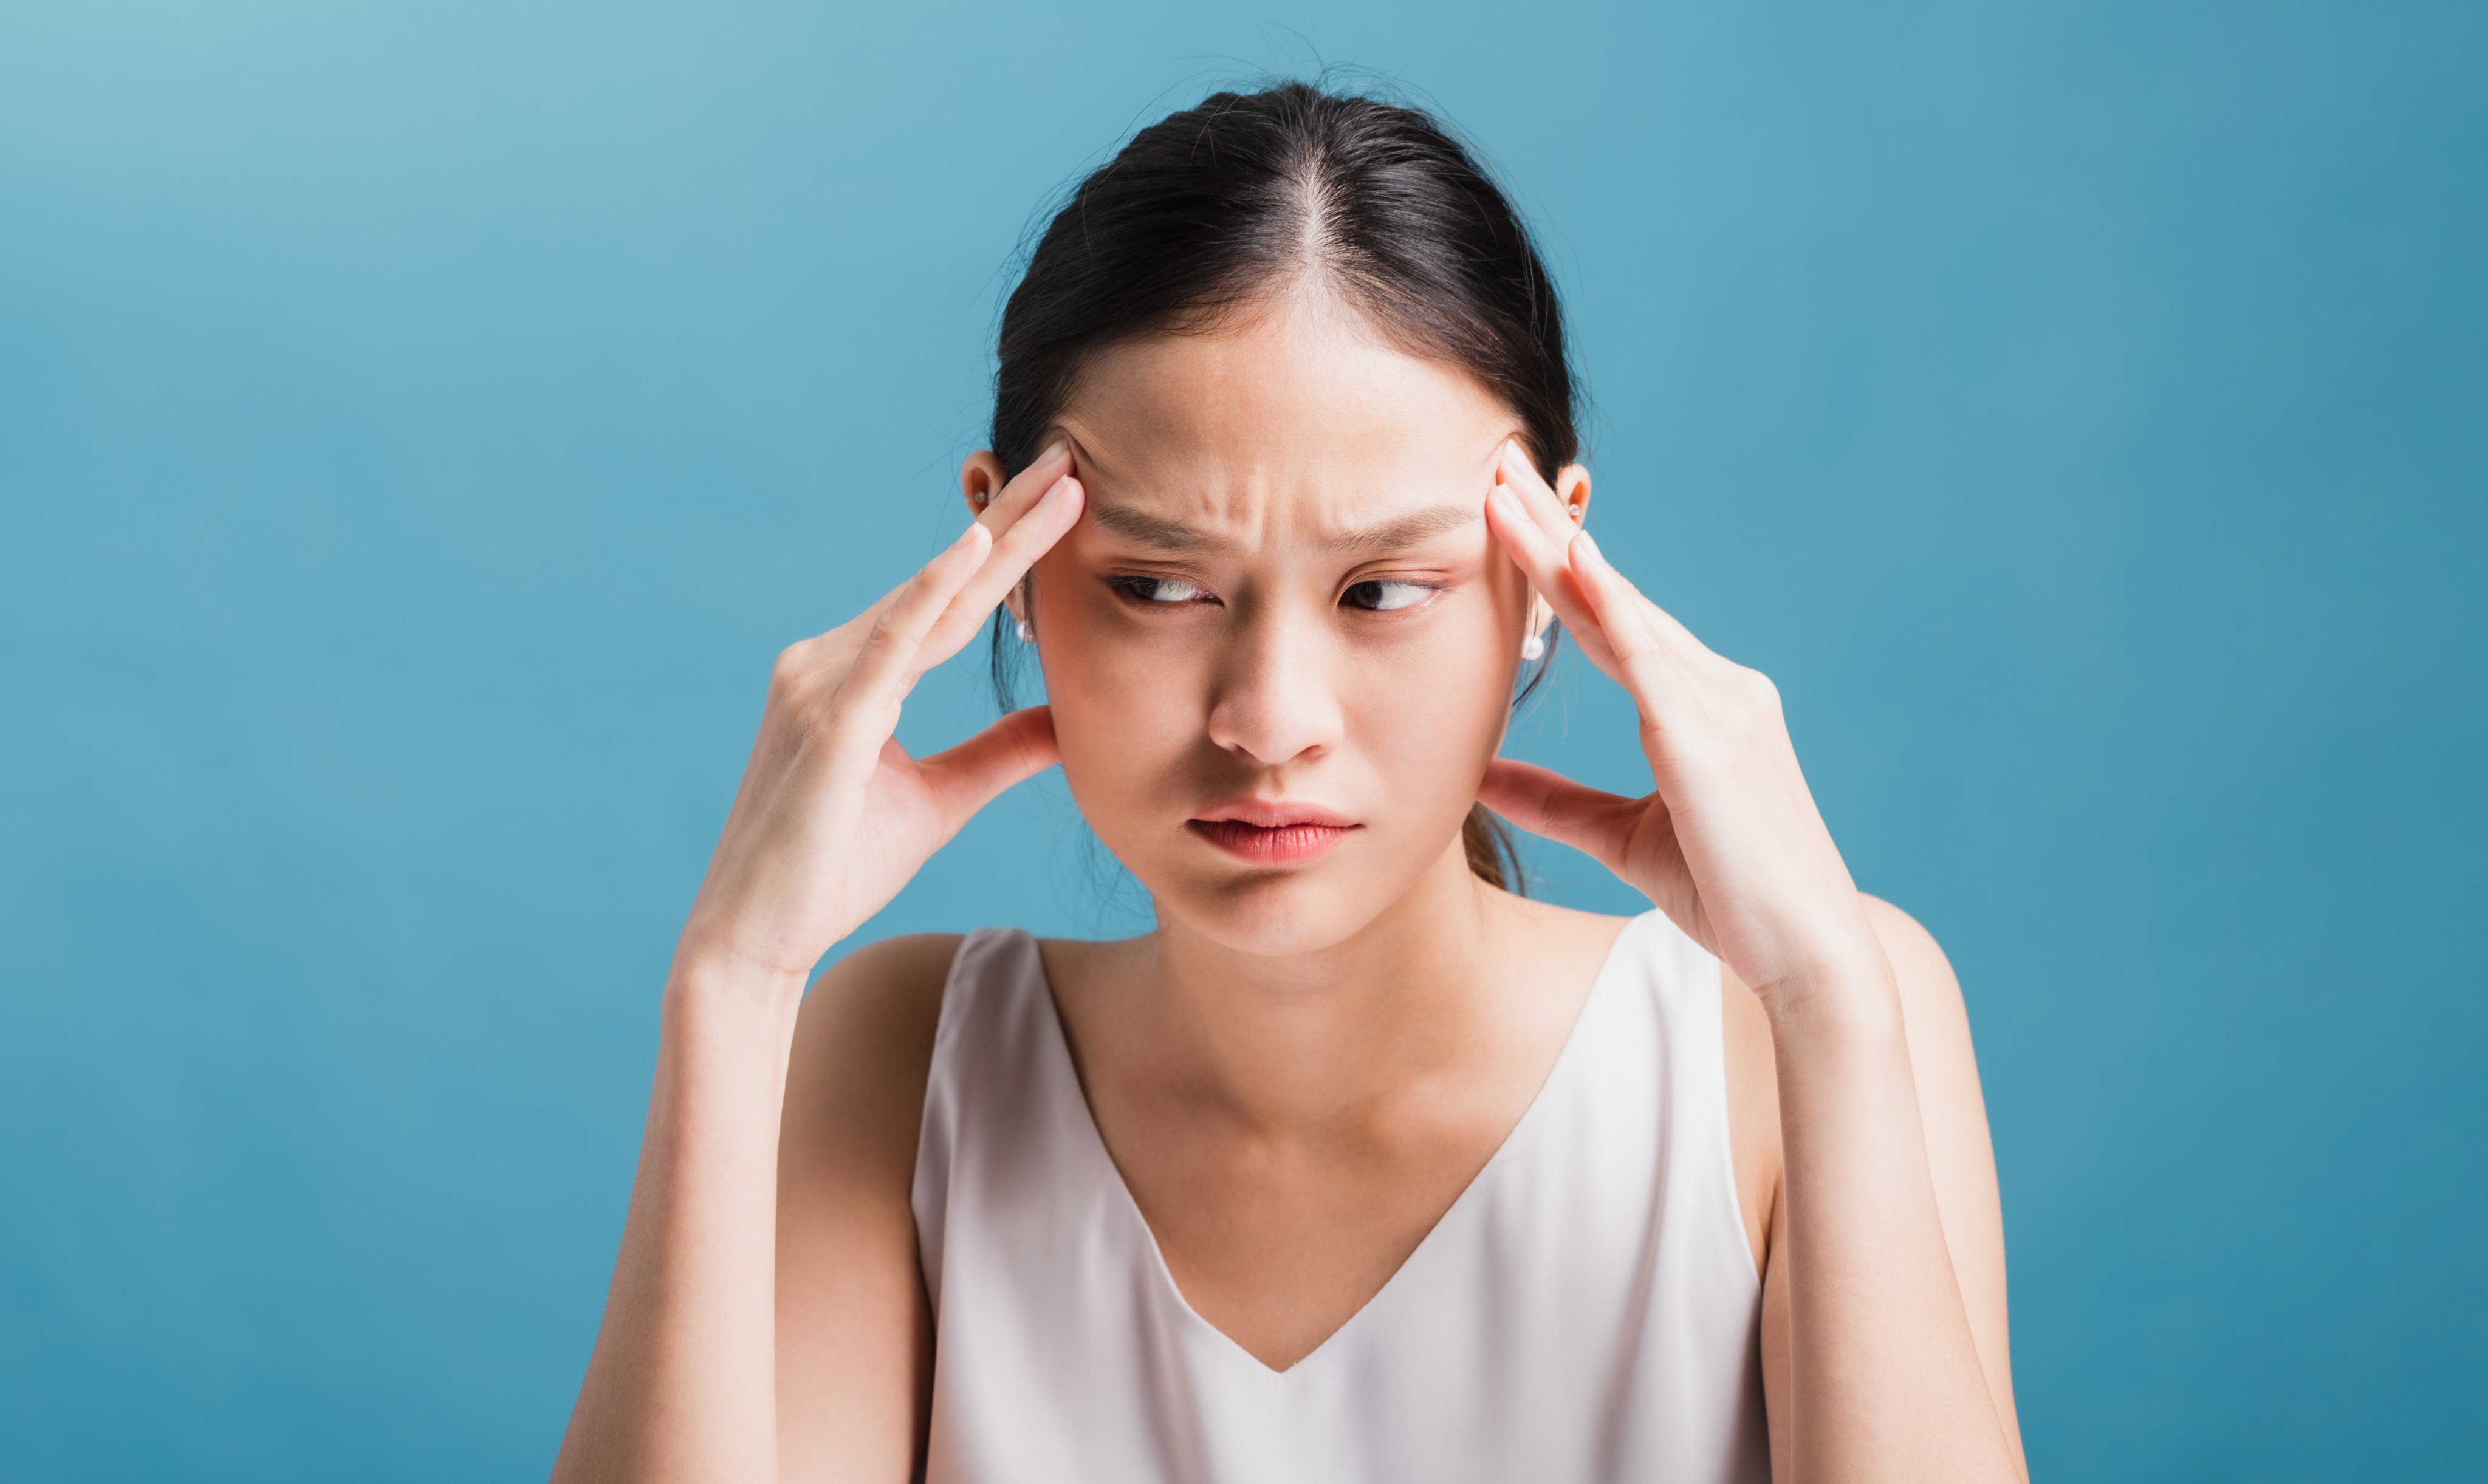 Experts describe the ways that incessant voice in our heads can help or hurt us – and how to make it stop when needed. Photo: Shutterstock